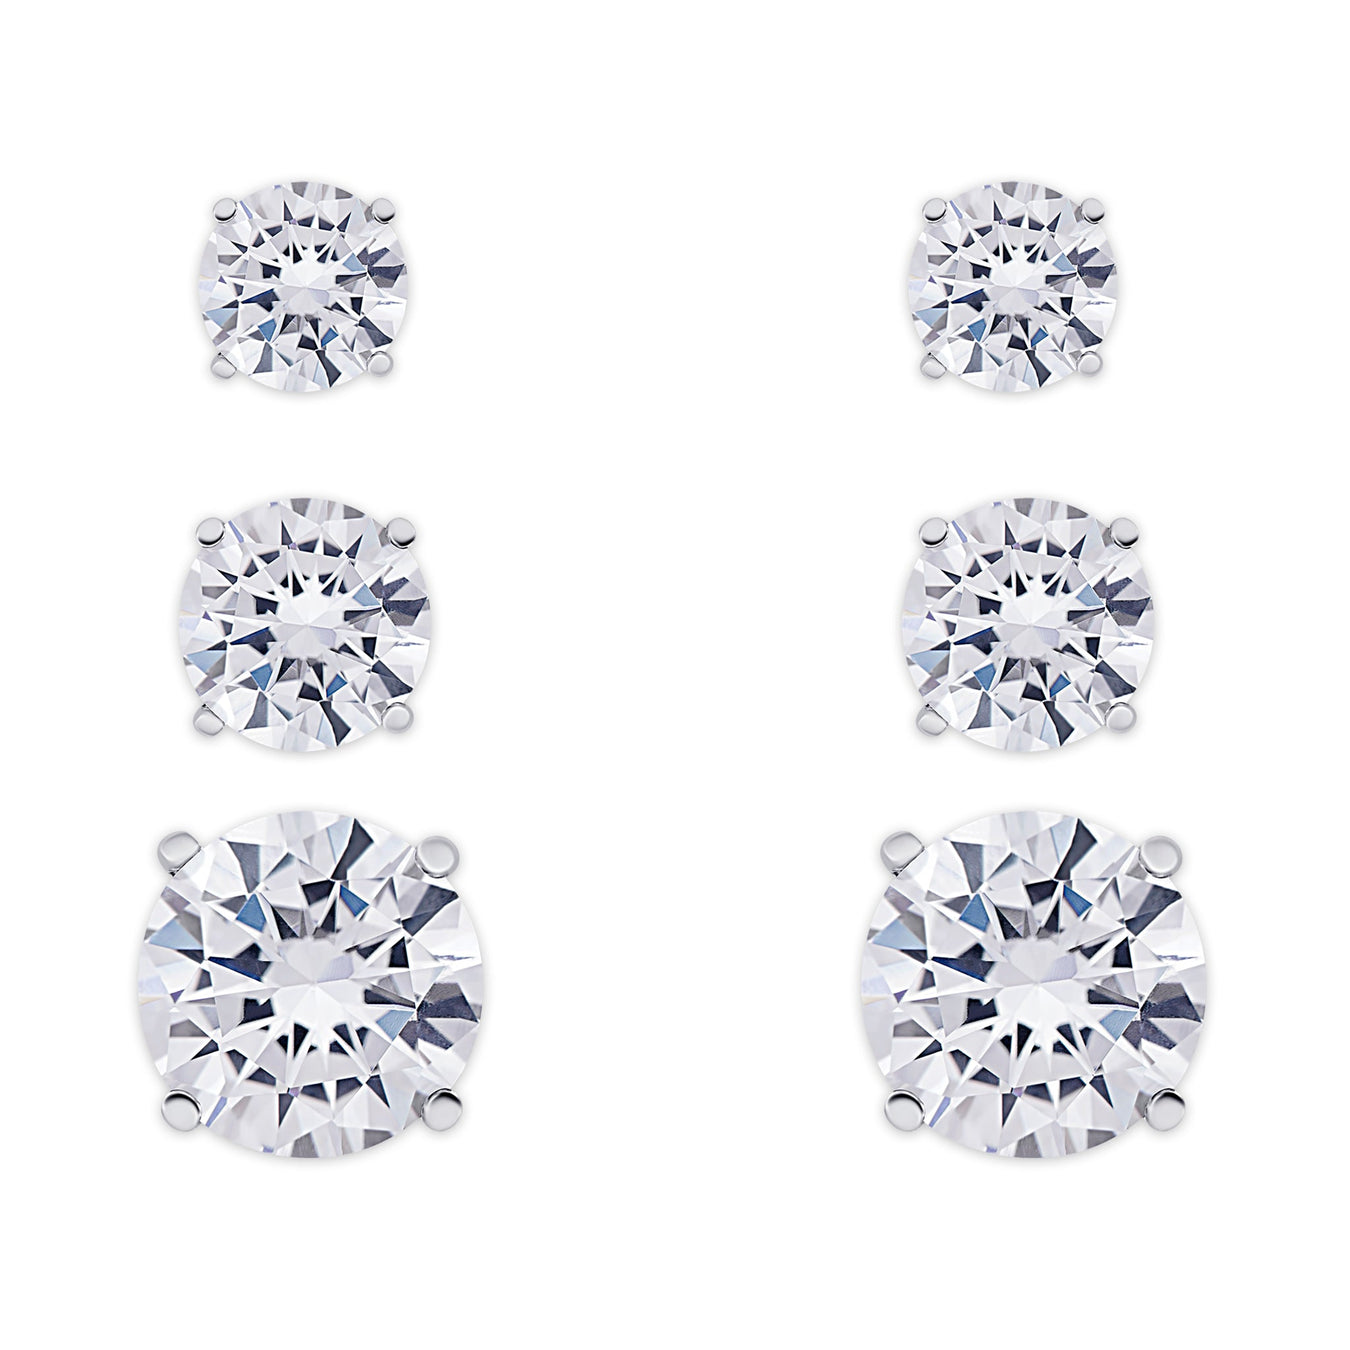 Silver Plated 3 Prs Small Round Cubic Zirconia Stud Earring Set